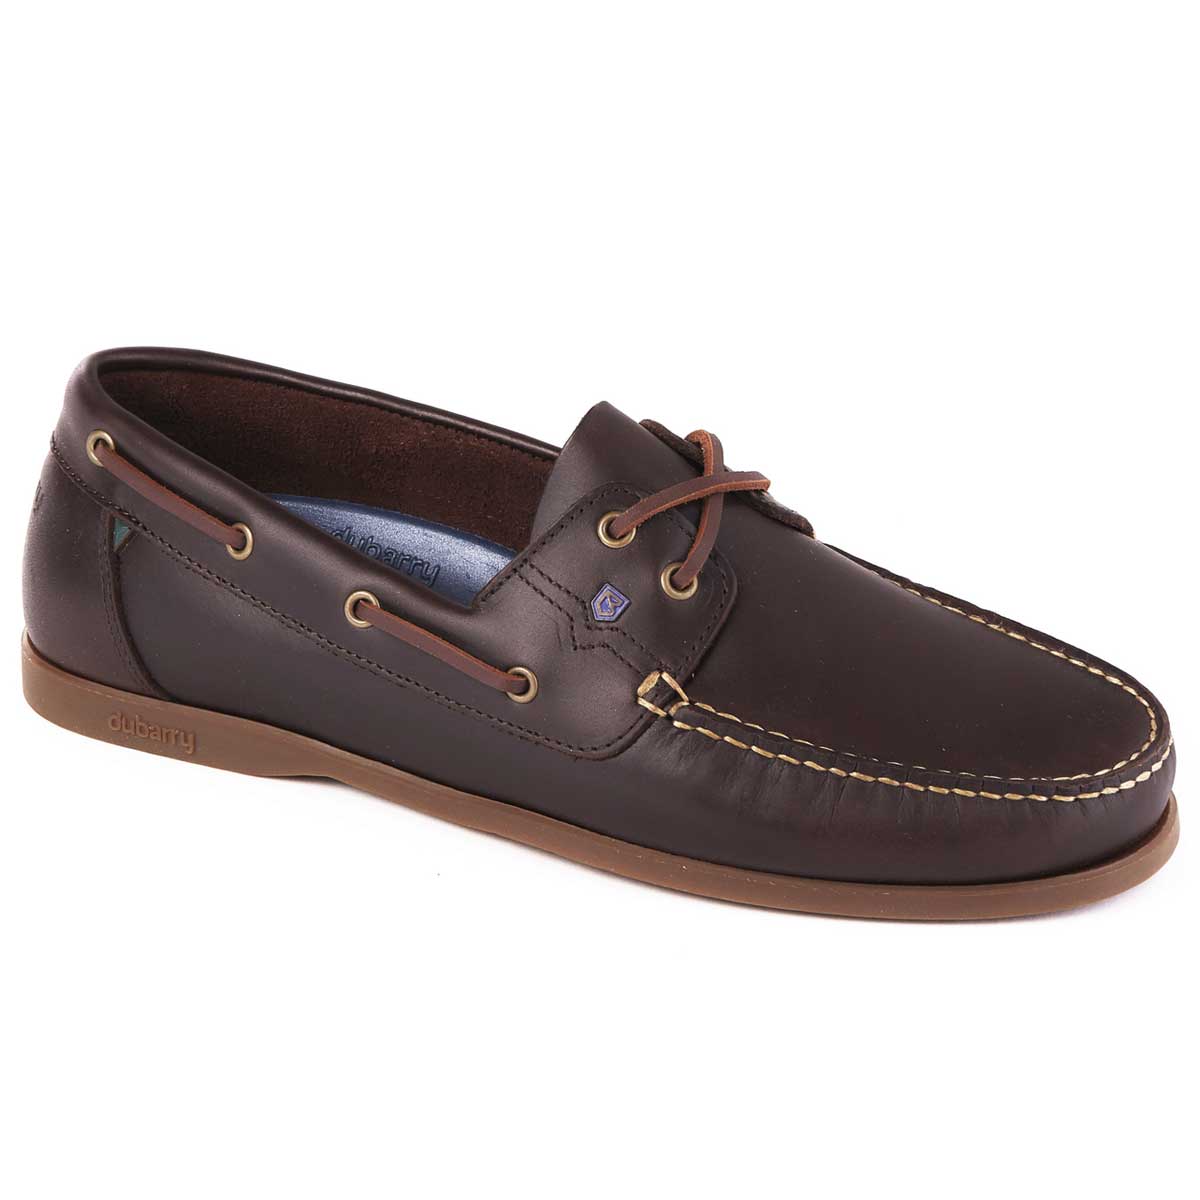 Men's Deck Shoes – A Farley Country Attire